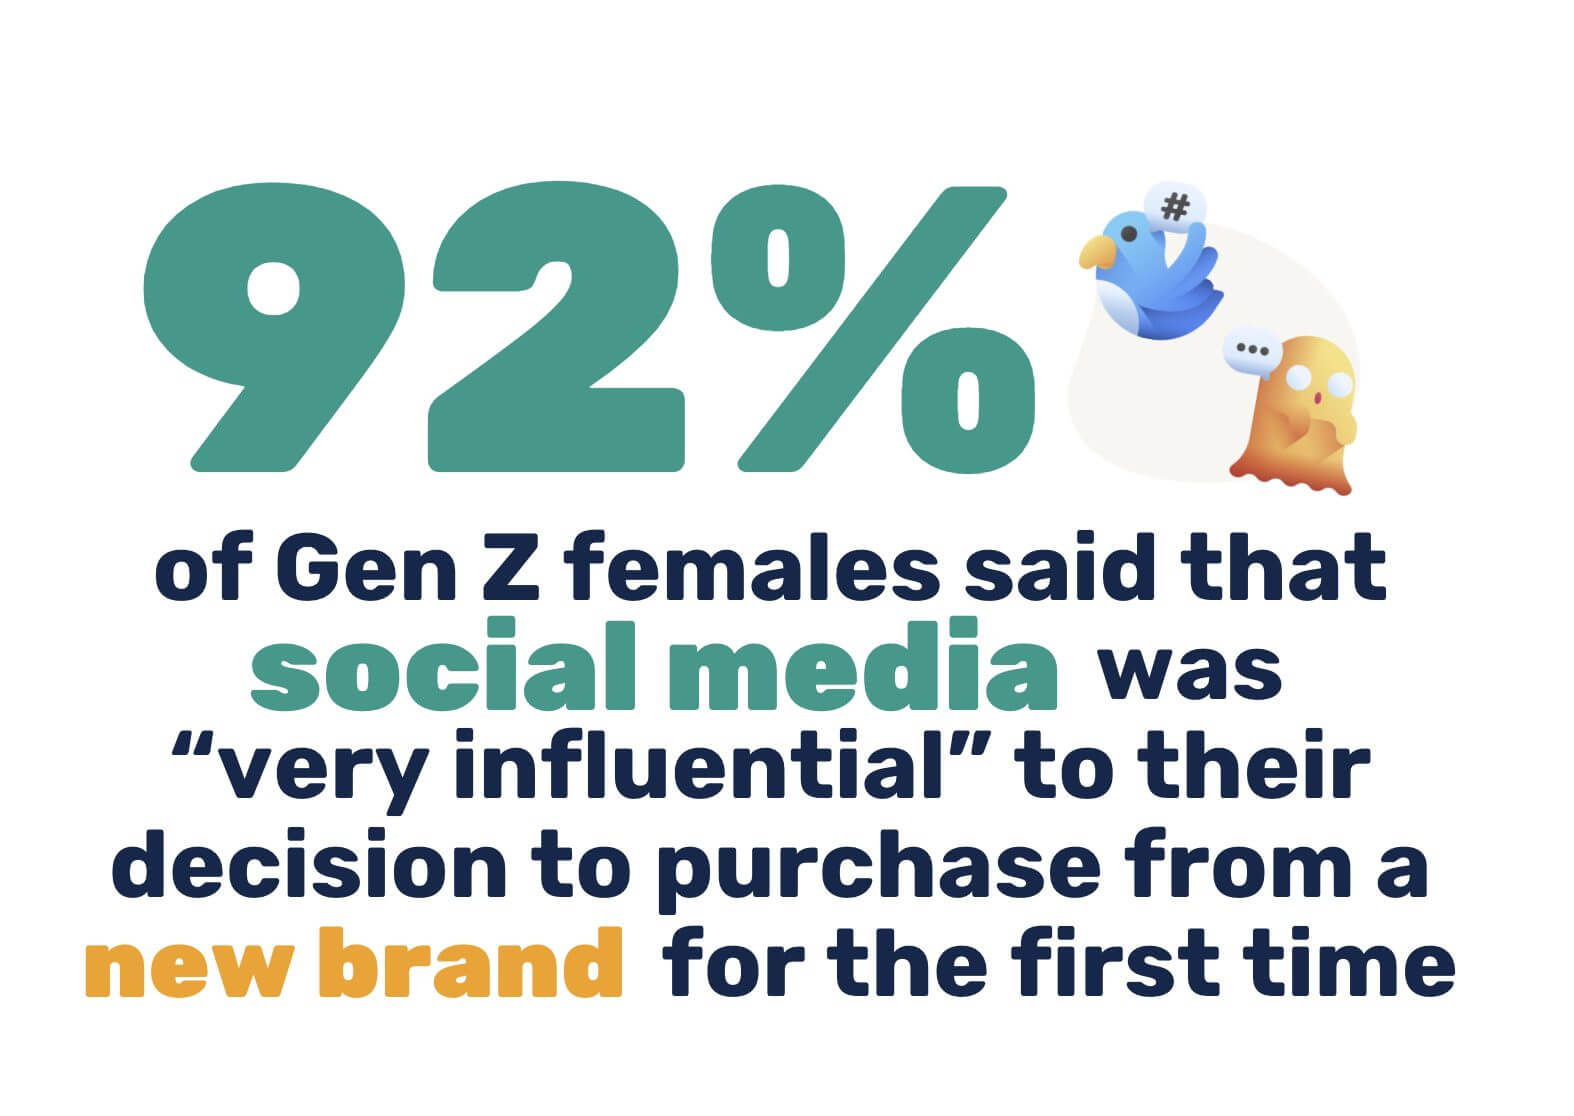 92% of Gen Z gemales said that social media was very influential to their decision to purchase from a new brand for the first time